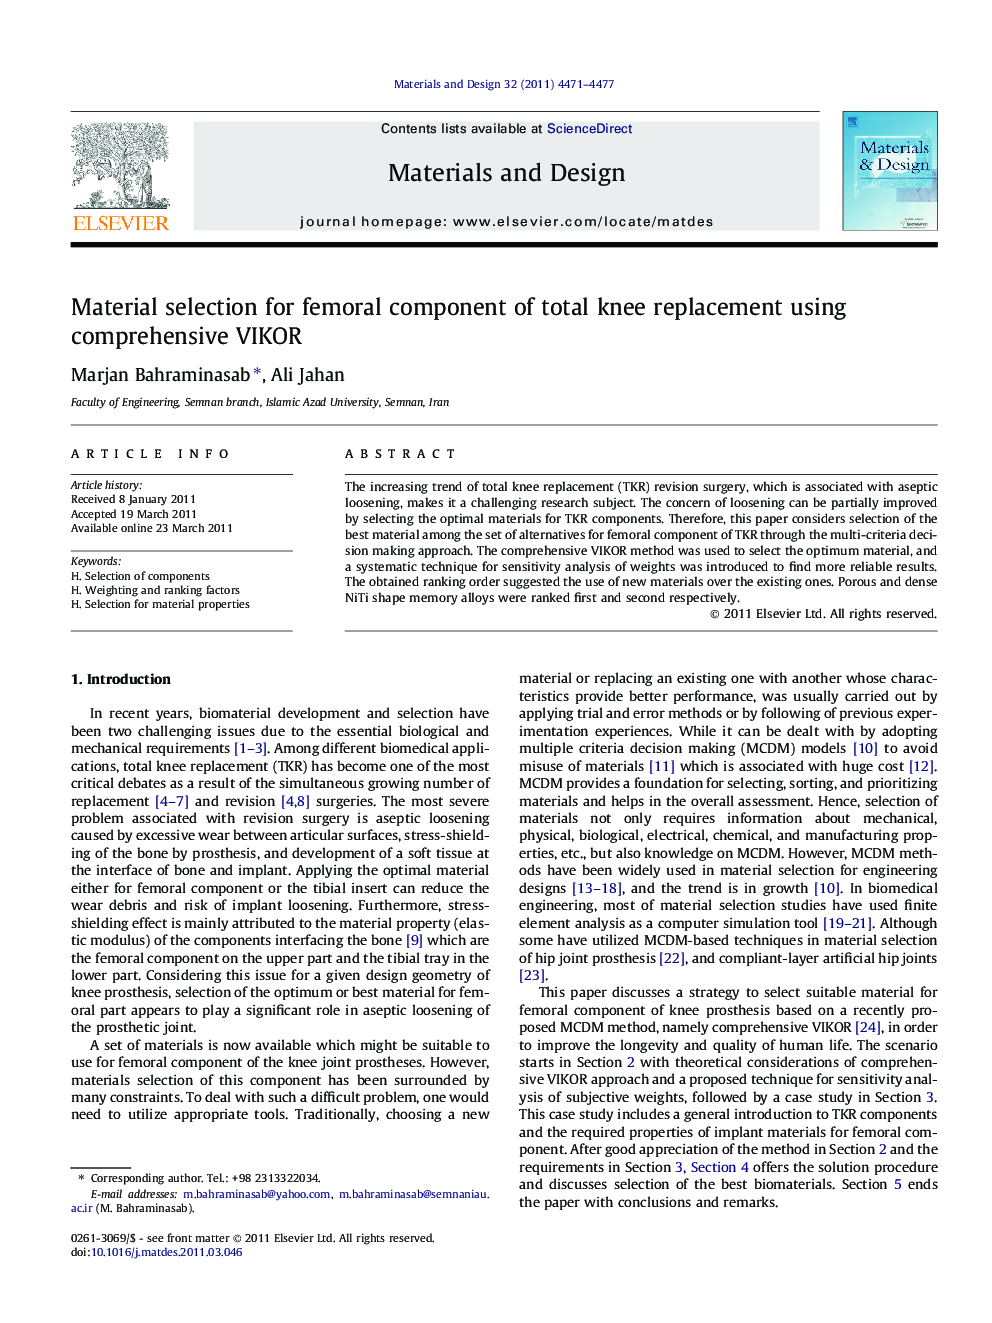 Material selection for femoral component of total knee replacement using comprehensive VIKOR